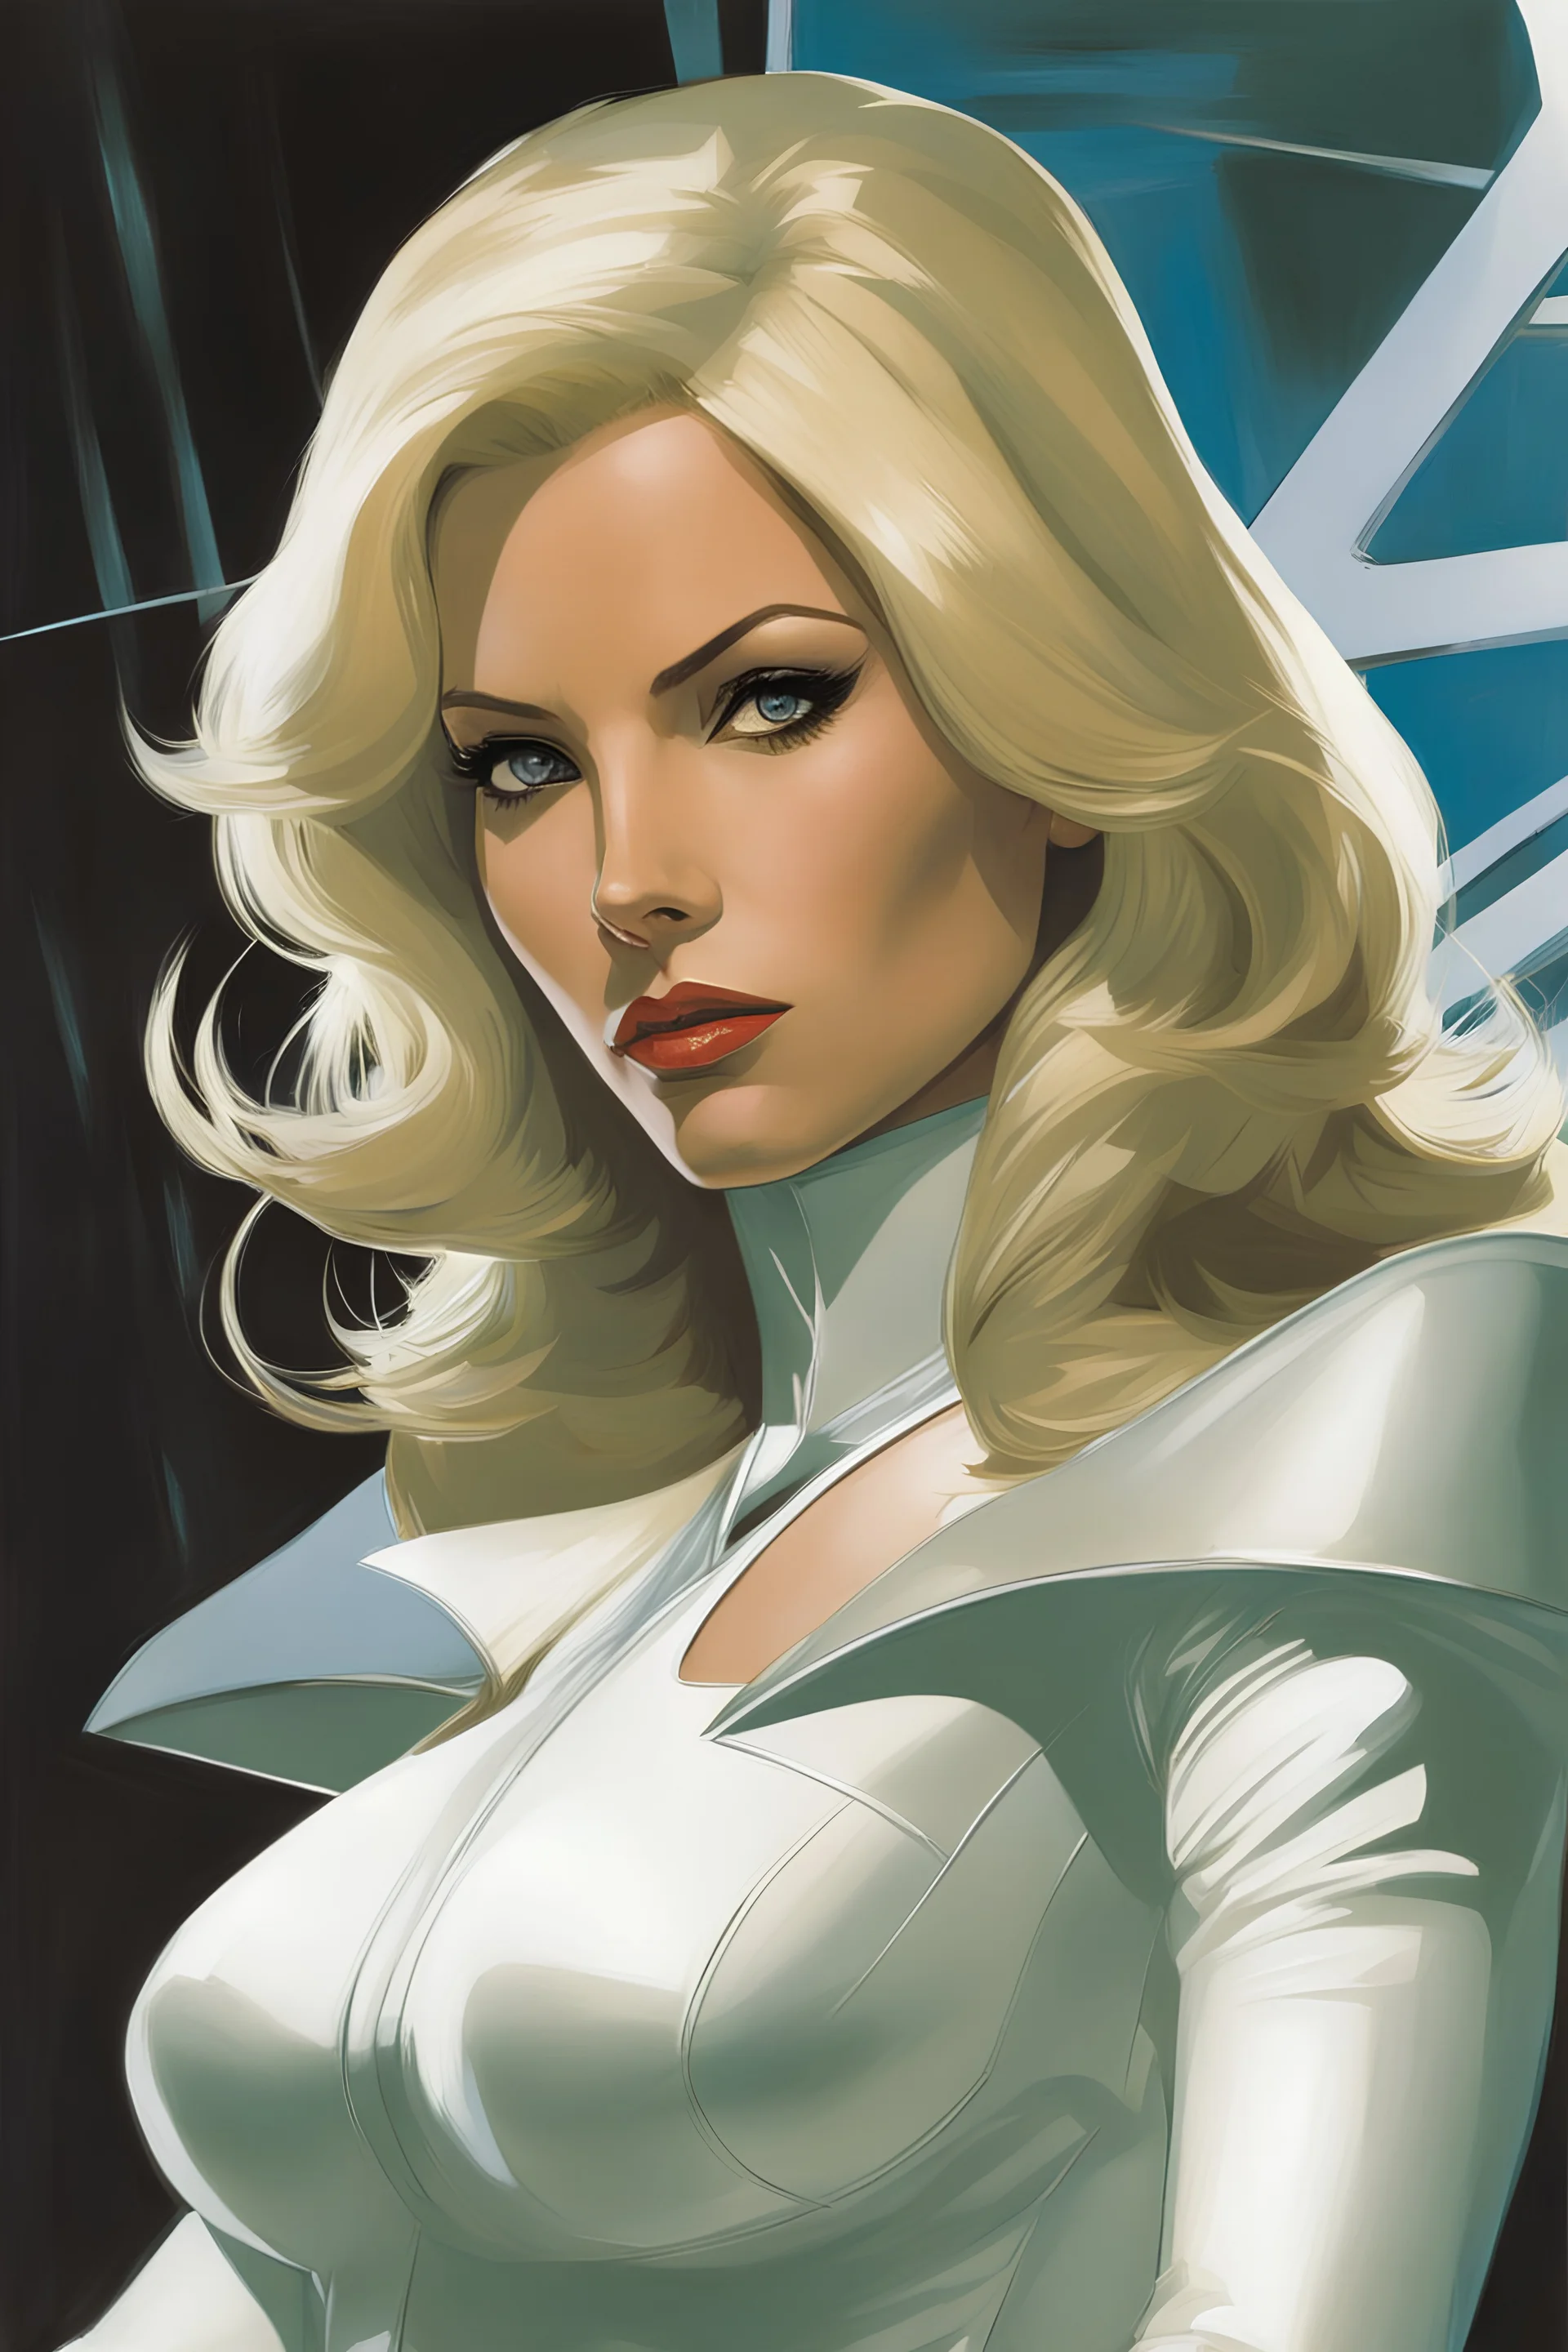 Emma Frost from The X-Men by Syd Mead